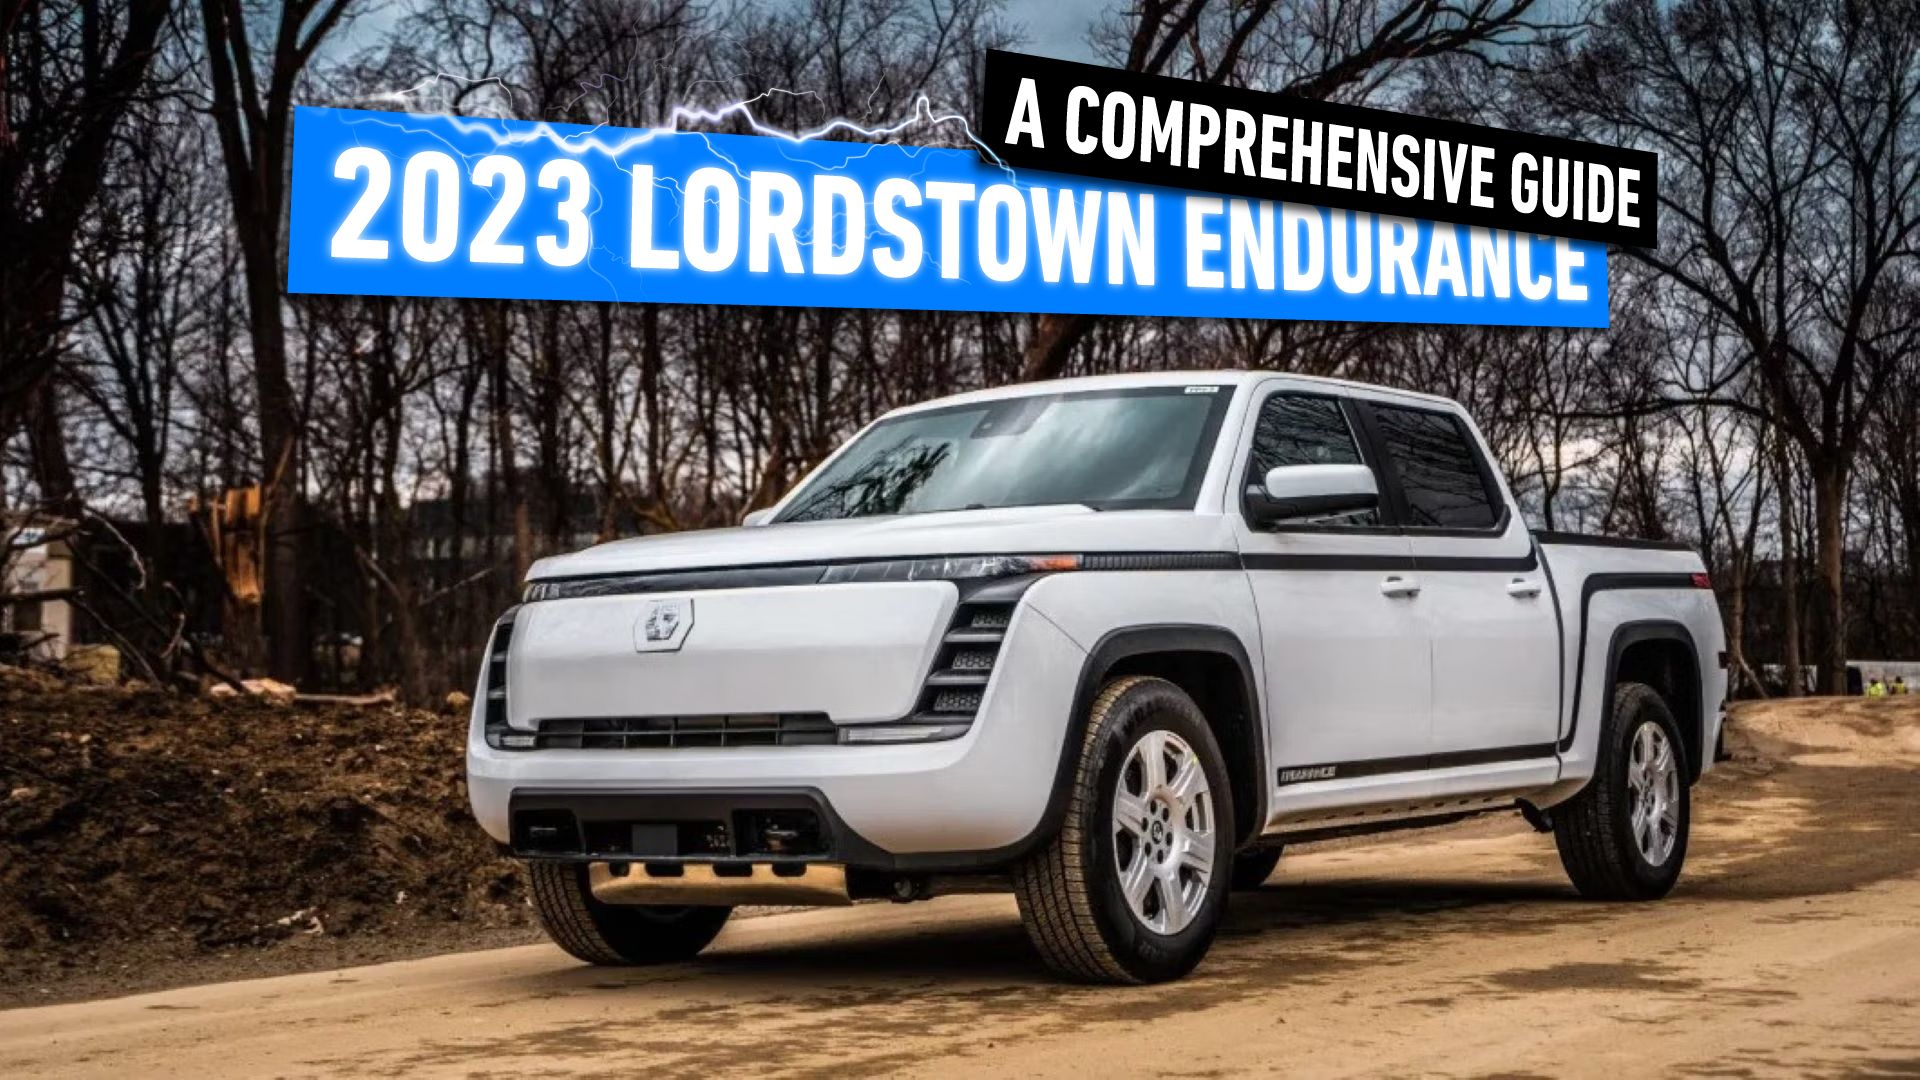 2023 Lordstown Endurance: A Comprehensive Guide On Features, Specs, And Pricing